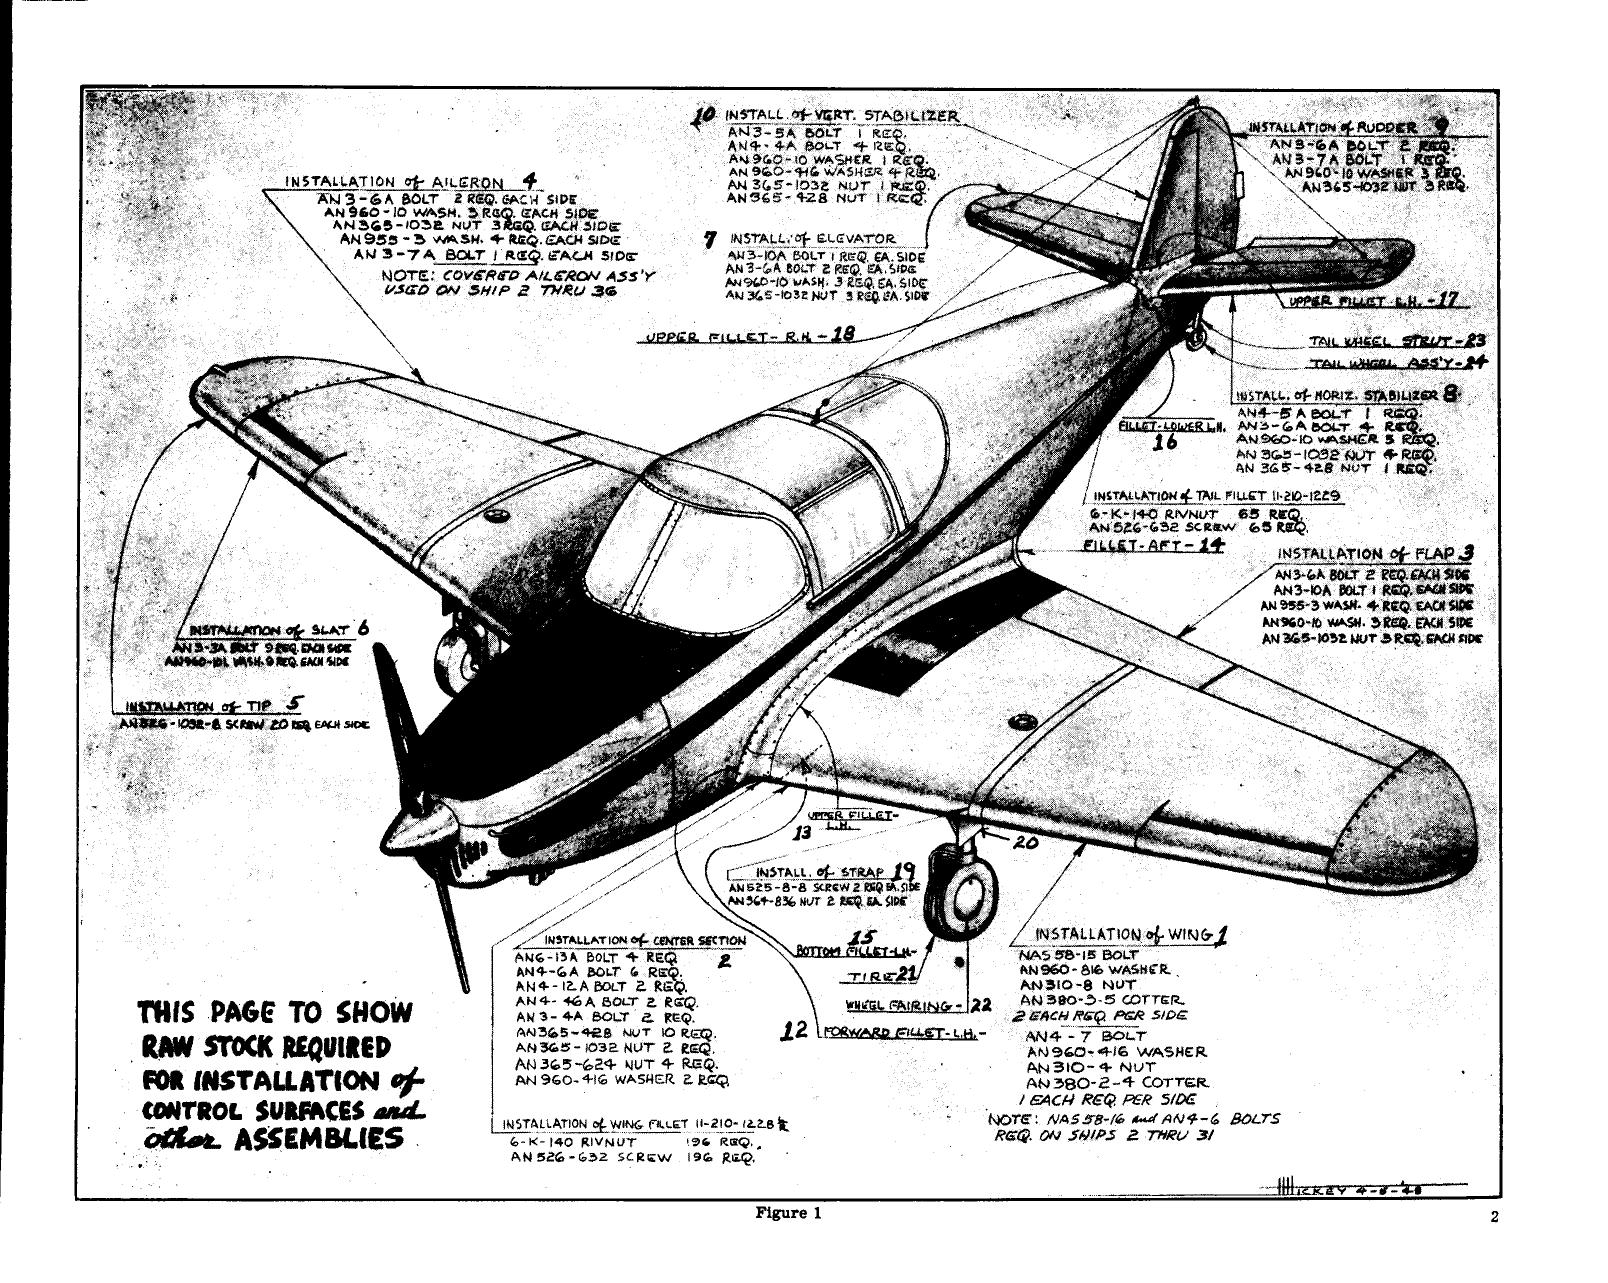 Sample page 7 from AirCorps Library document: Parts Catalog for Swift 125/145 Airplane